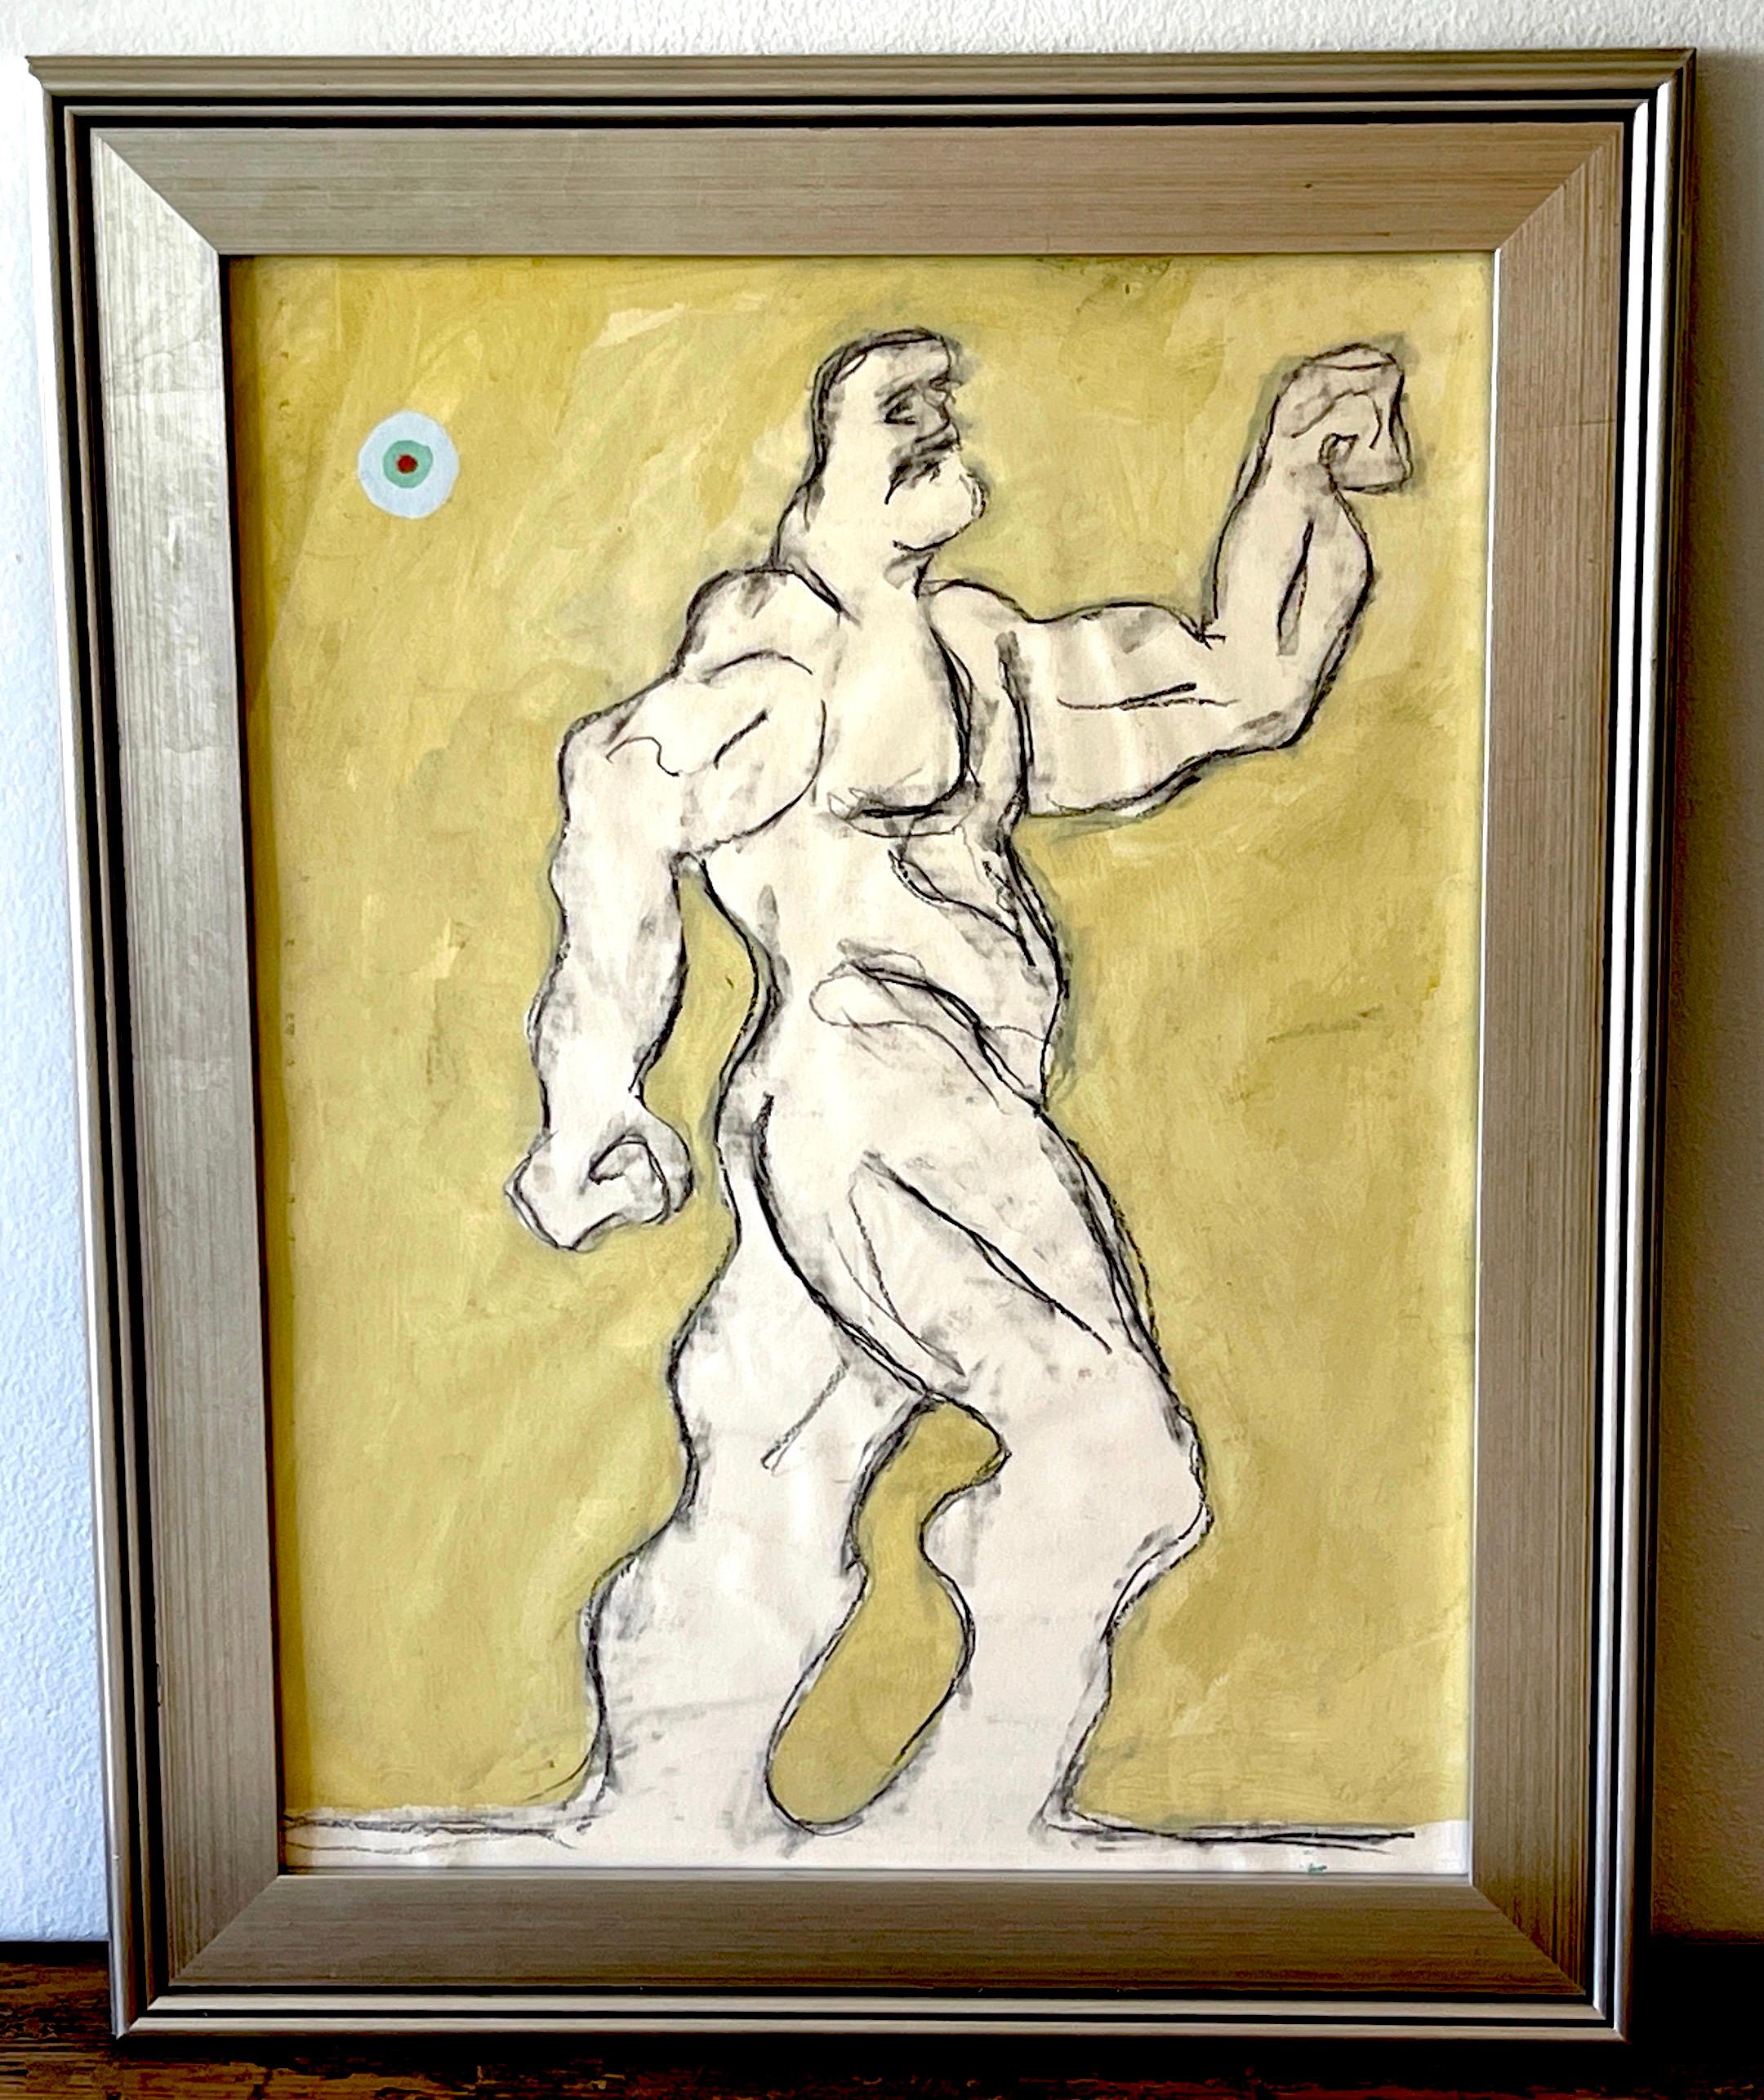 'Hercules' oil/mixed media on paper, 1960s by Douglas D. Peden 
USA, 1933-2015, Listed Modern Painter, Mathematician & Scholar
Oil/Mixed Media on Paper 
Signed in Pencil on Back 'Douglas Peden' 
This work measures 18-Inches x 24-Inches